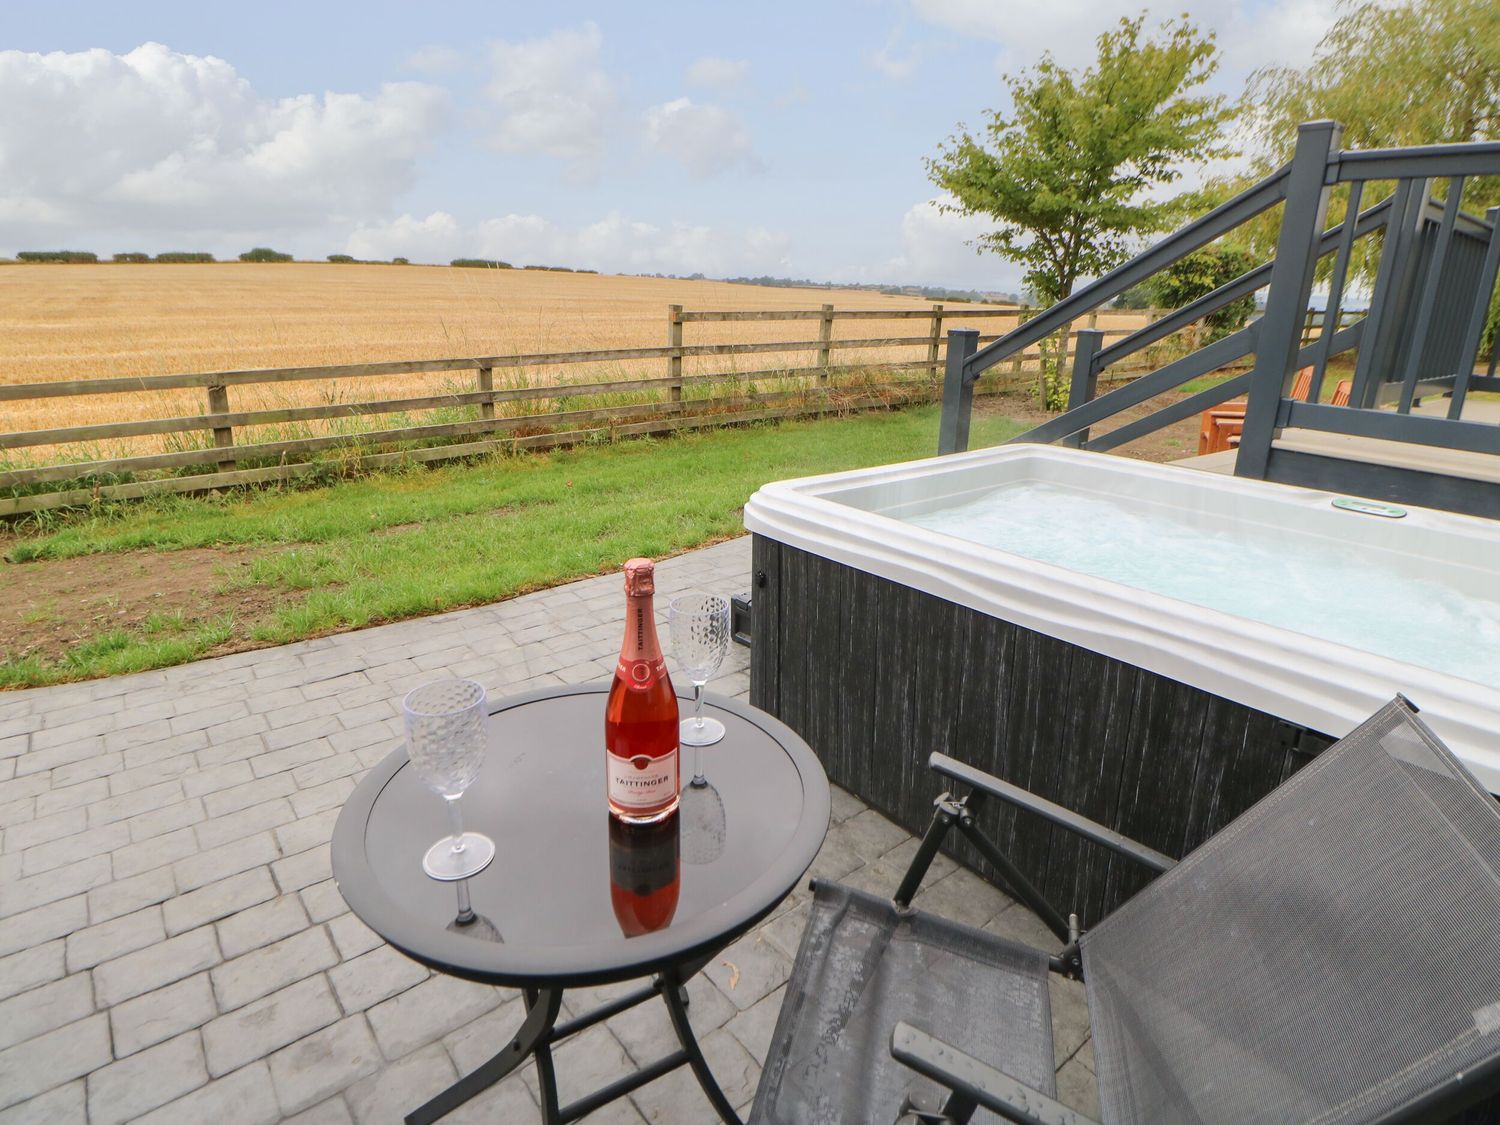 Bowes Hideaway, is near Eppleby, Durham. One-bedroom lodge, ideal for couples. Hot tub. Rural views.